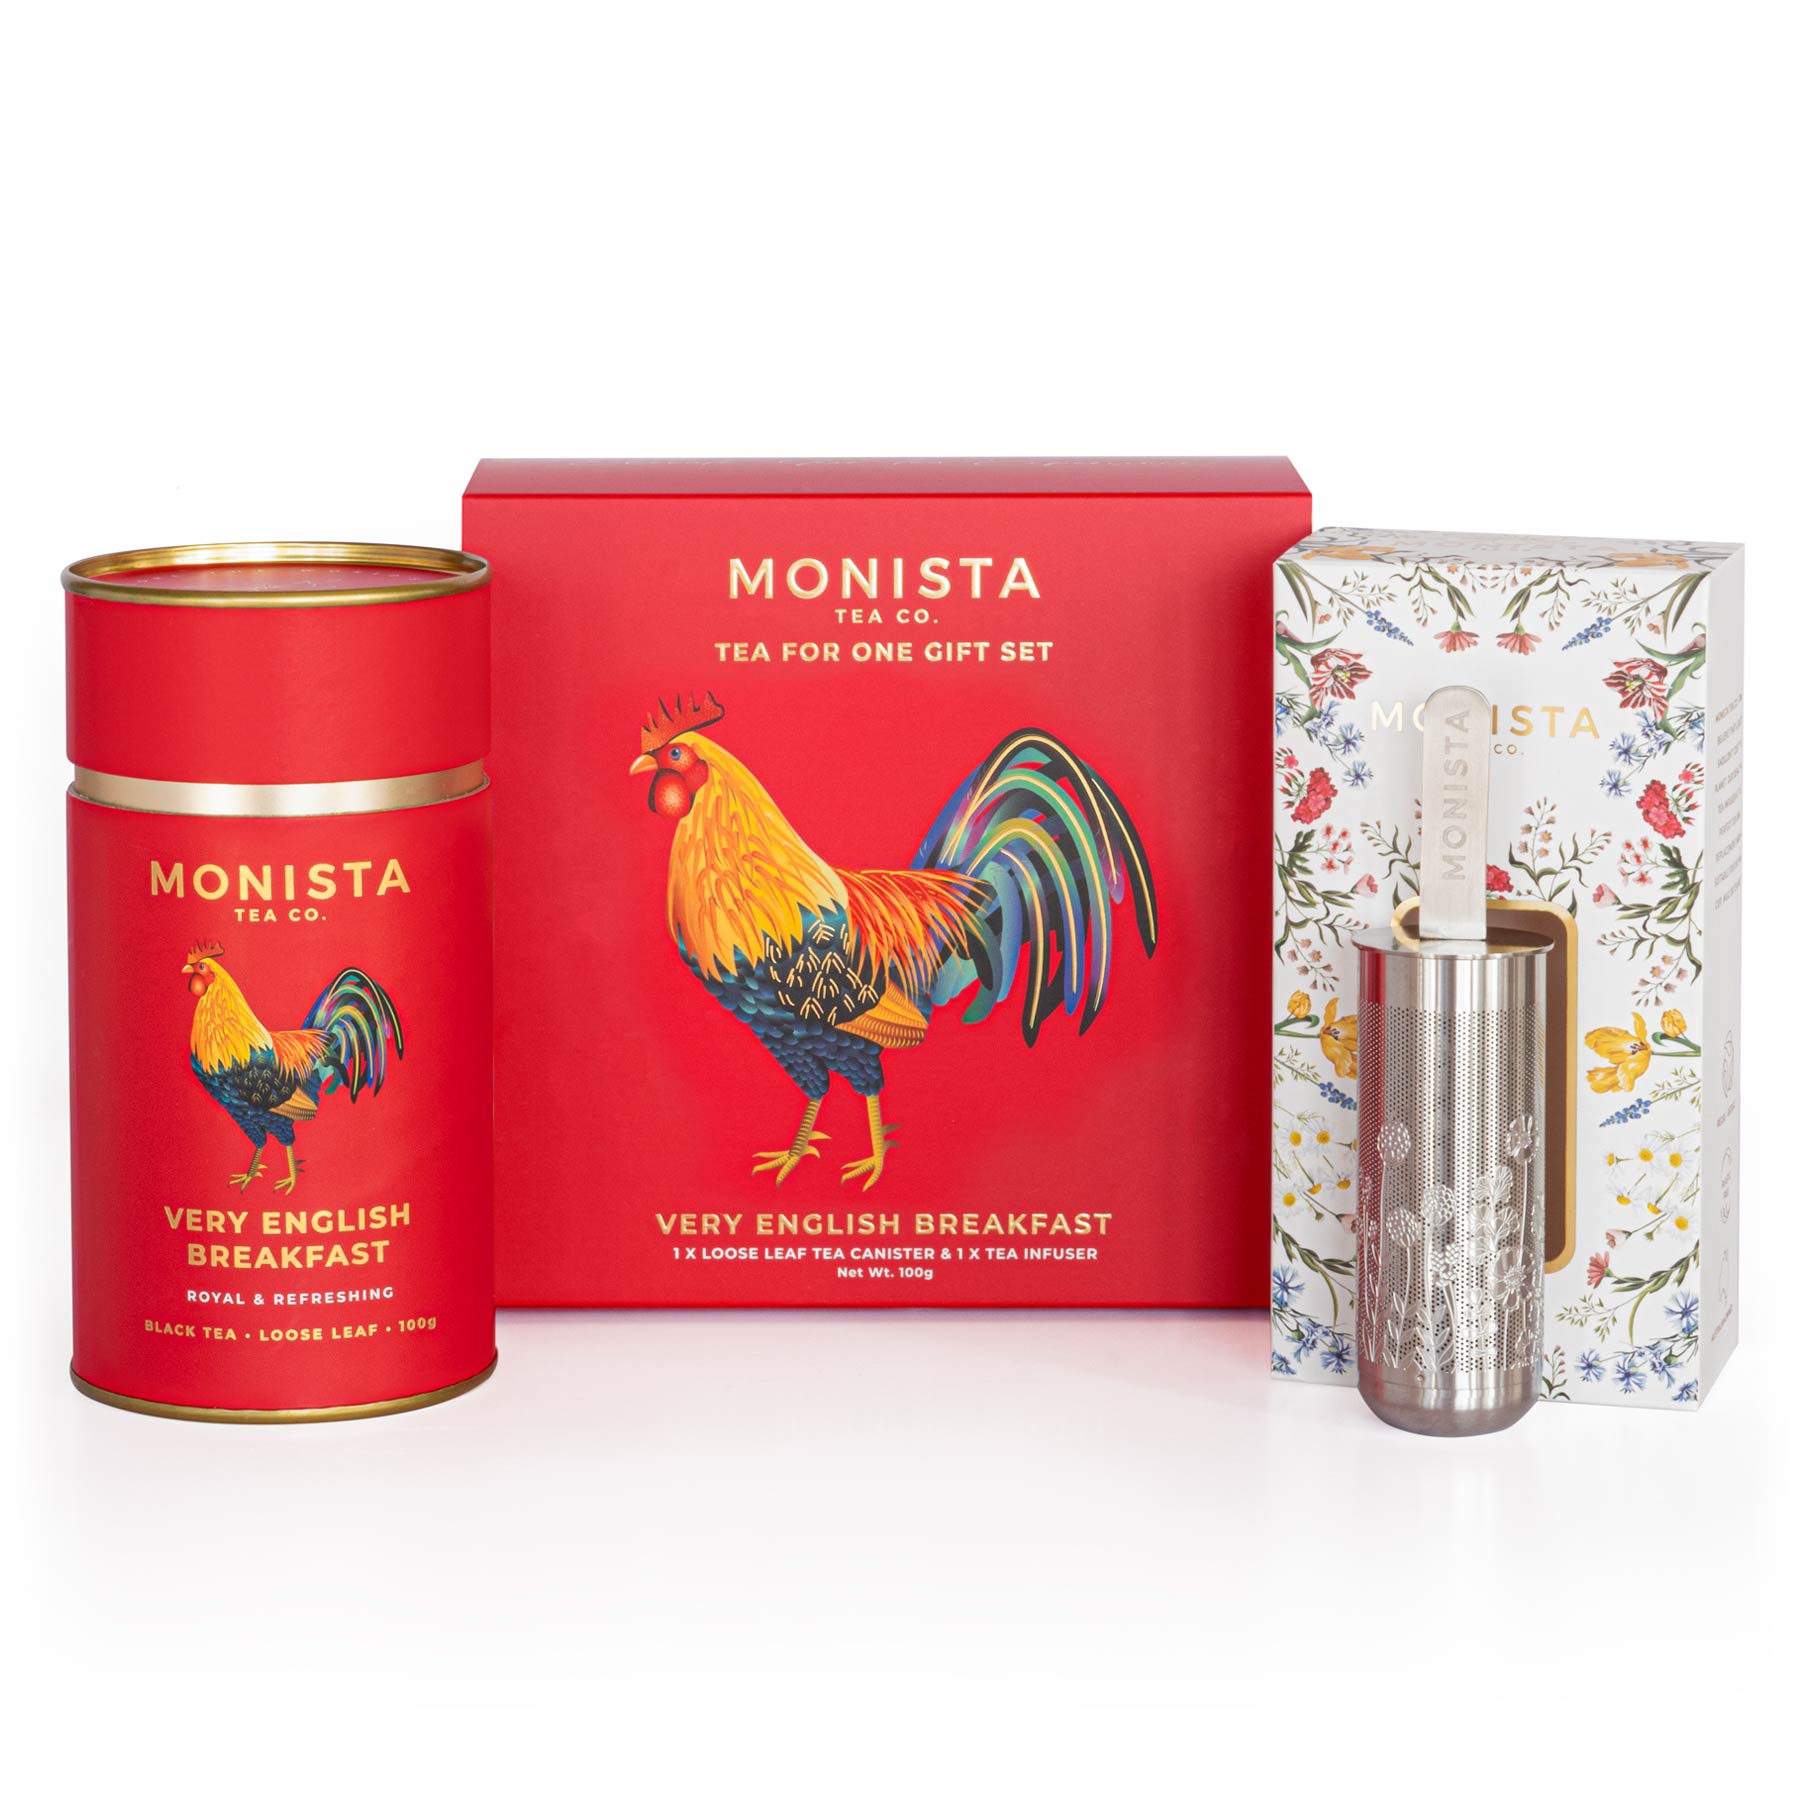 Tea gift set with red canister and infuser